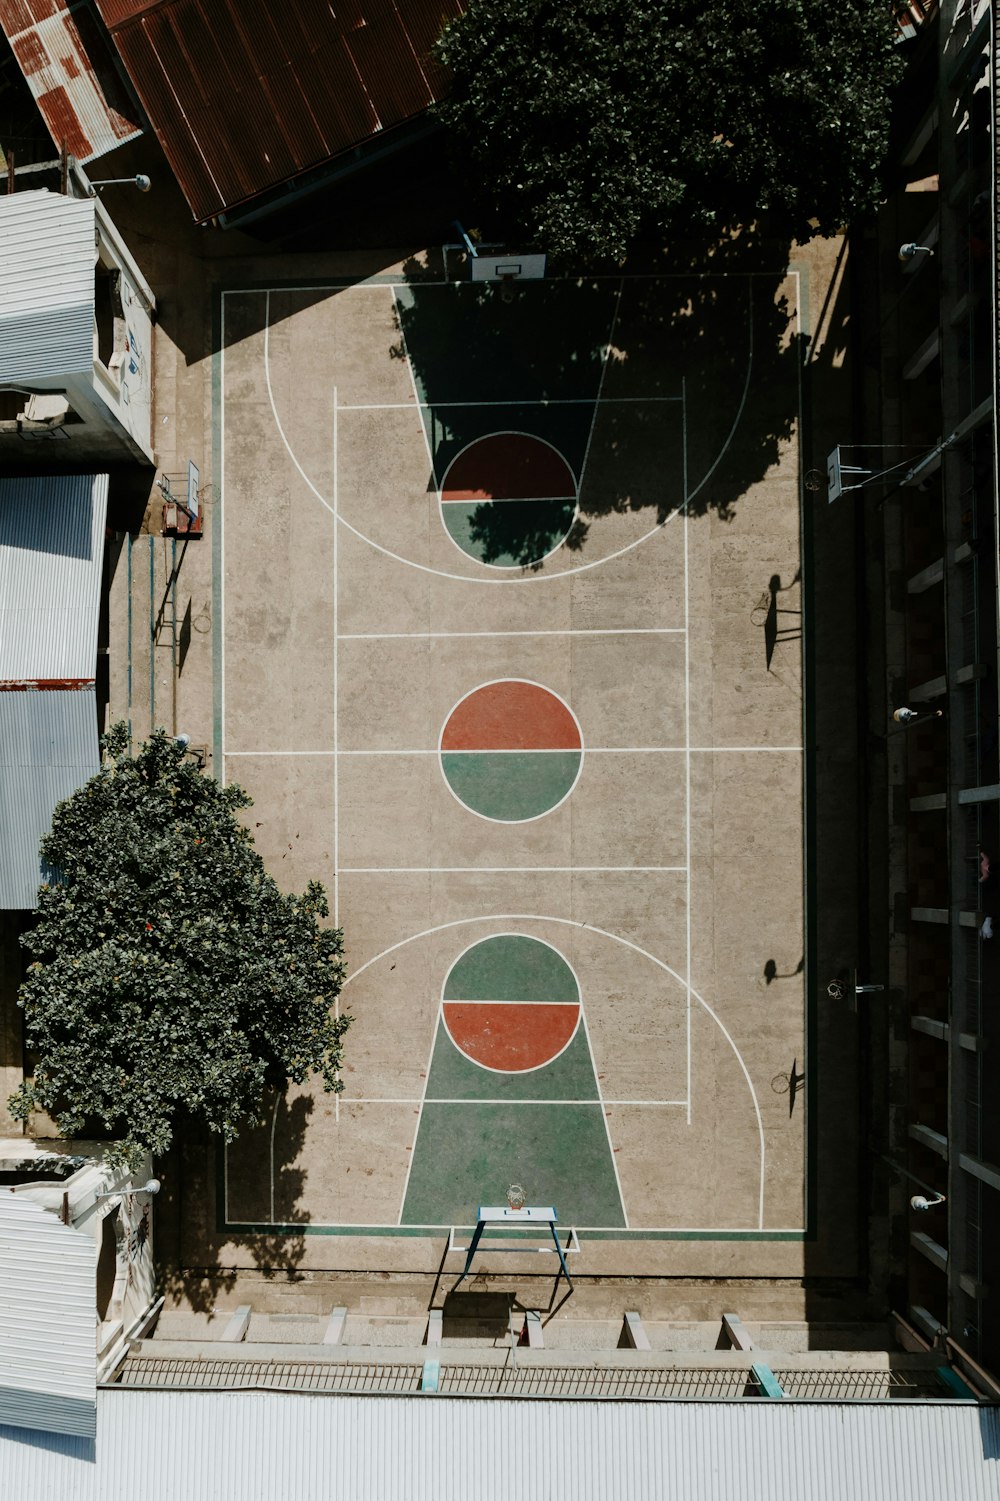 an overhead view of a basketball court with a tree